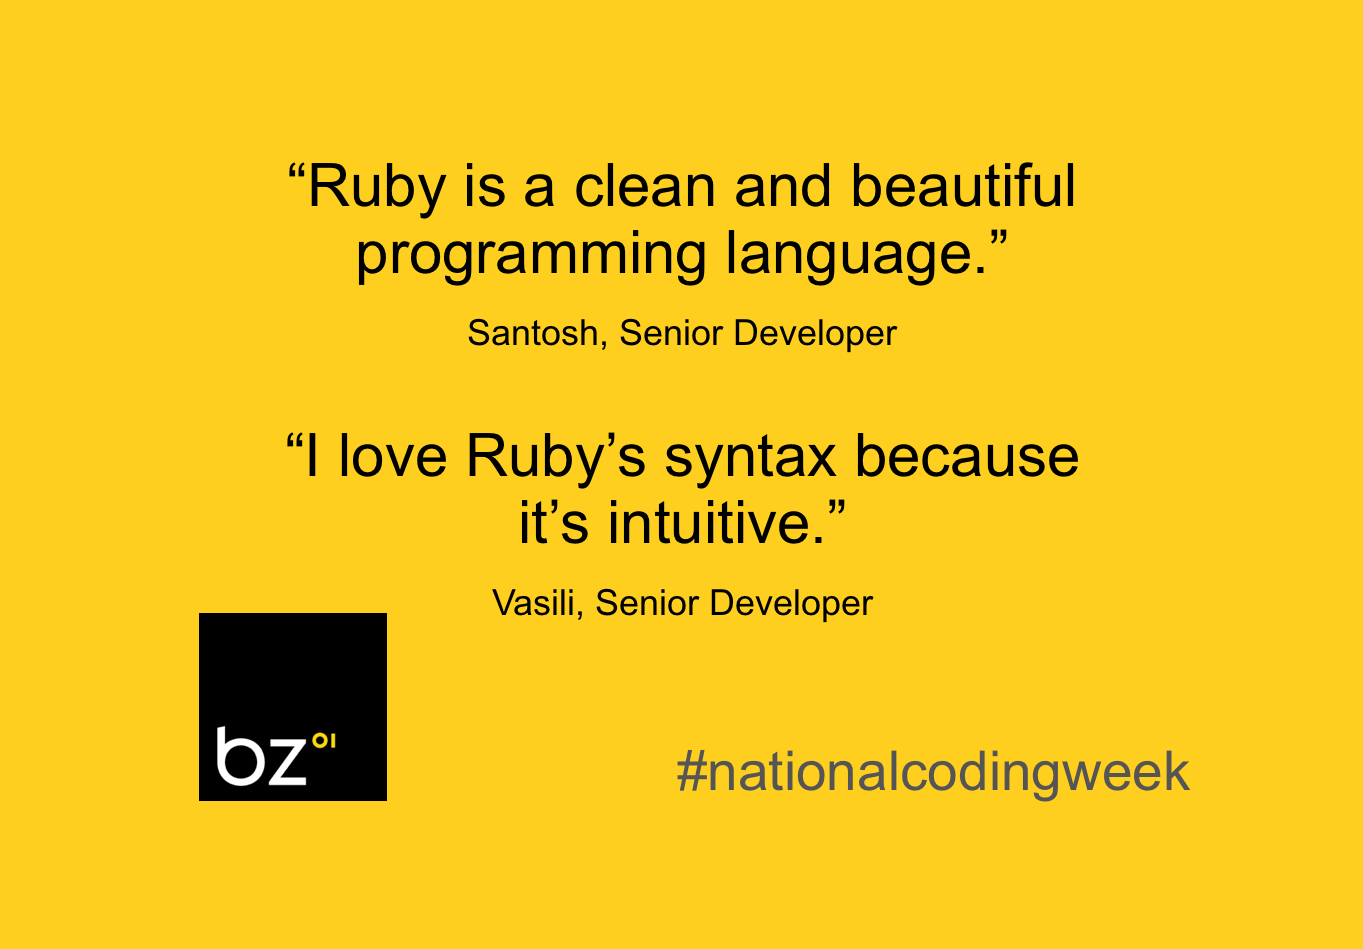 "Ruby is a clean and beautiful programming language." "I love Ruby's syntax because it's intuitive."